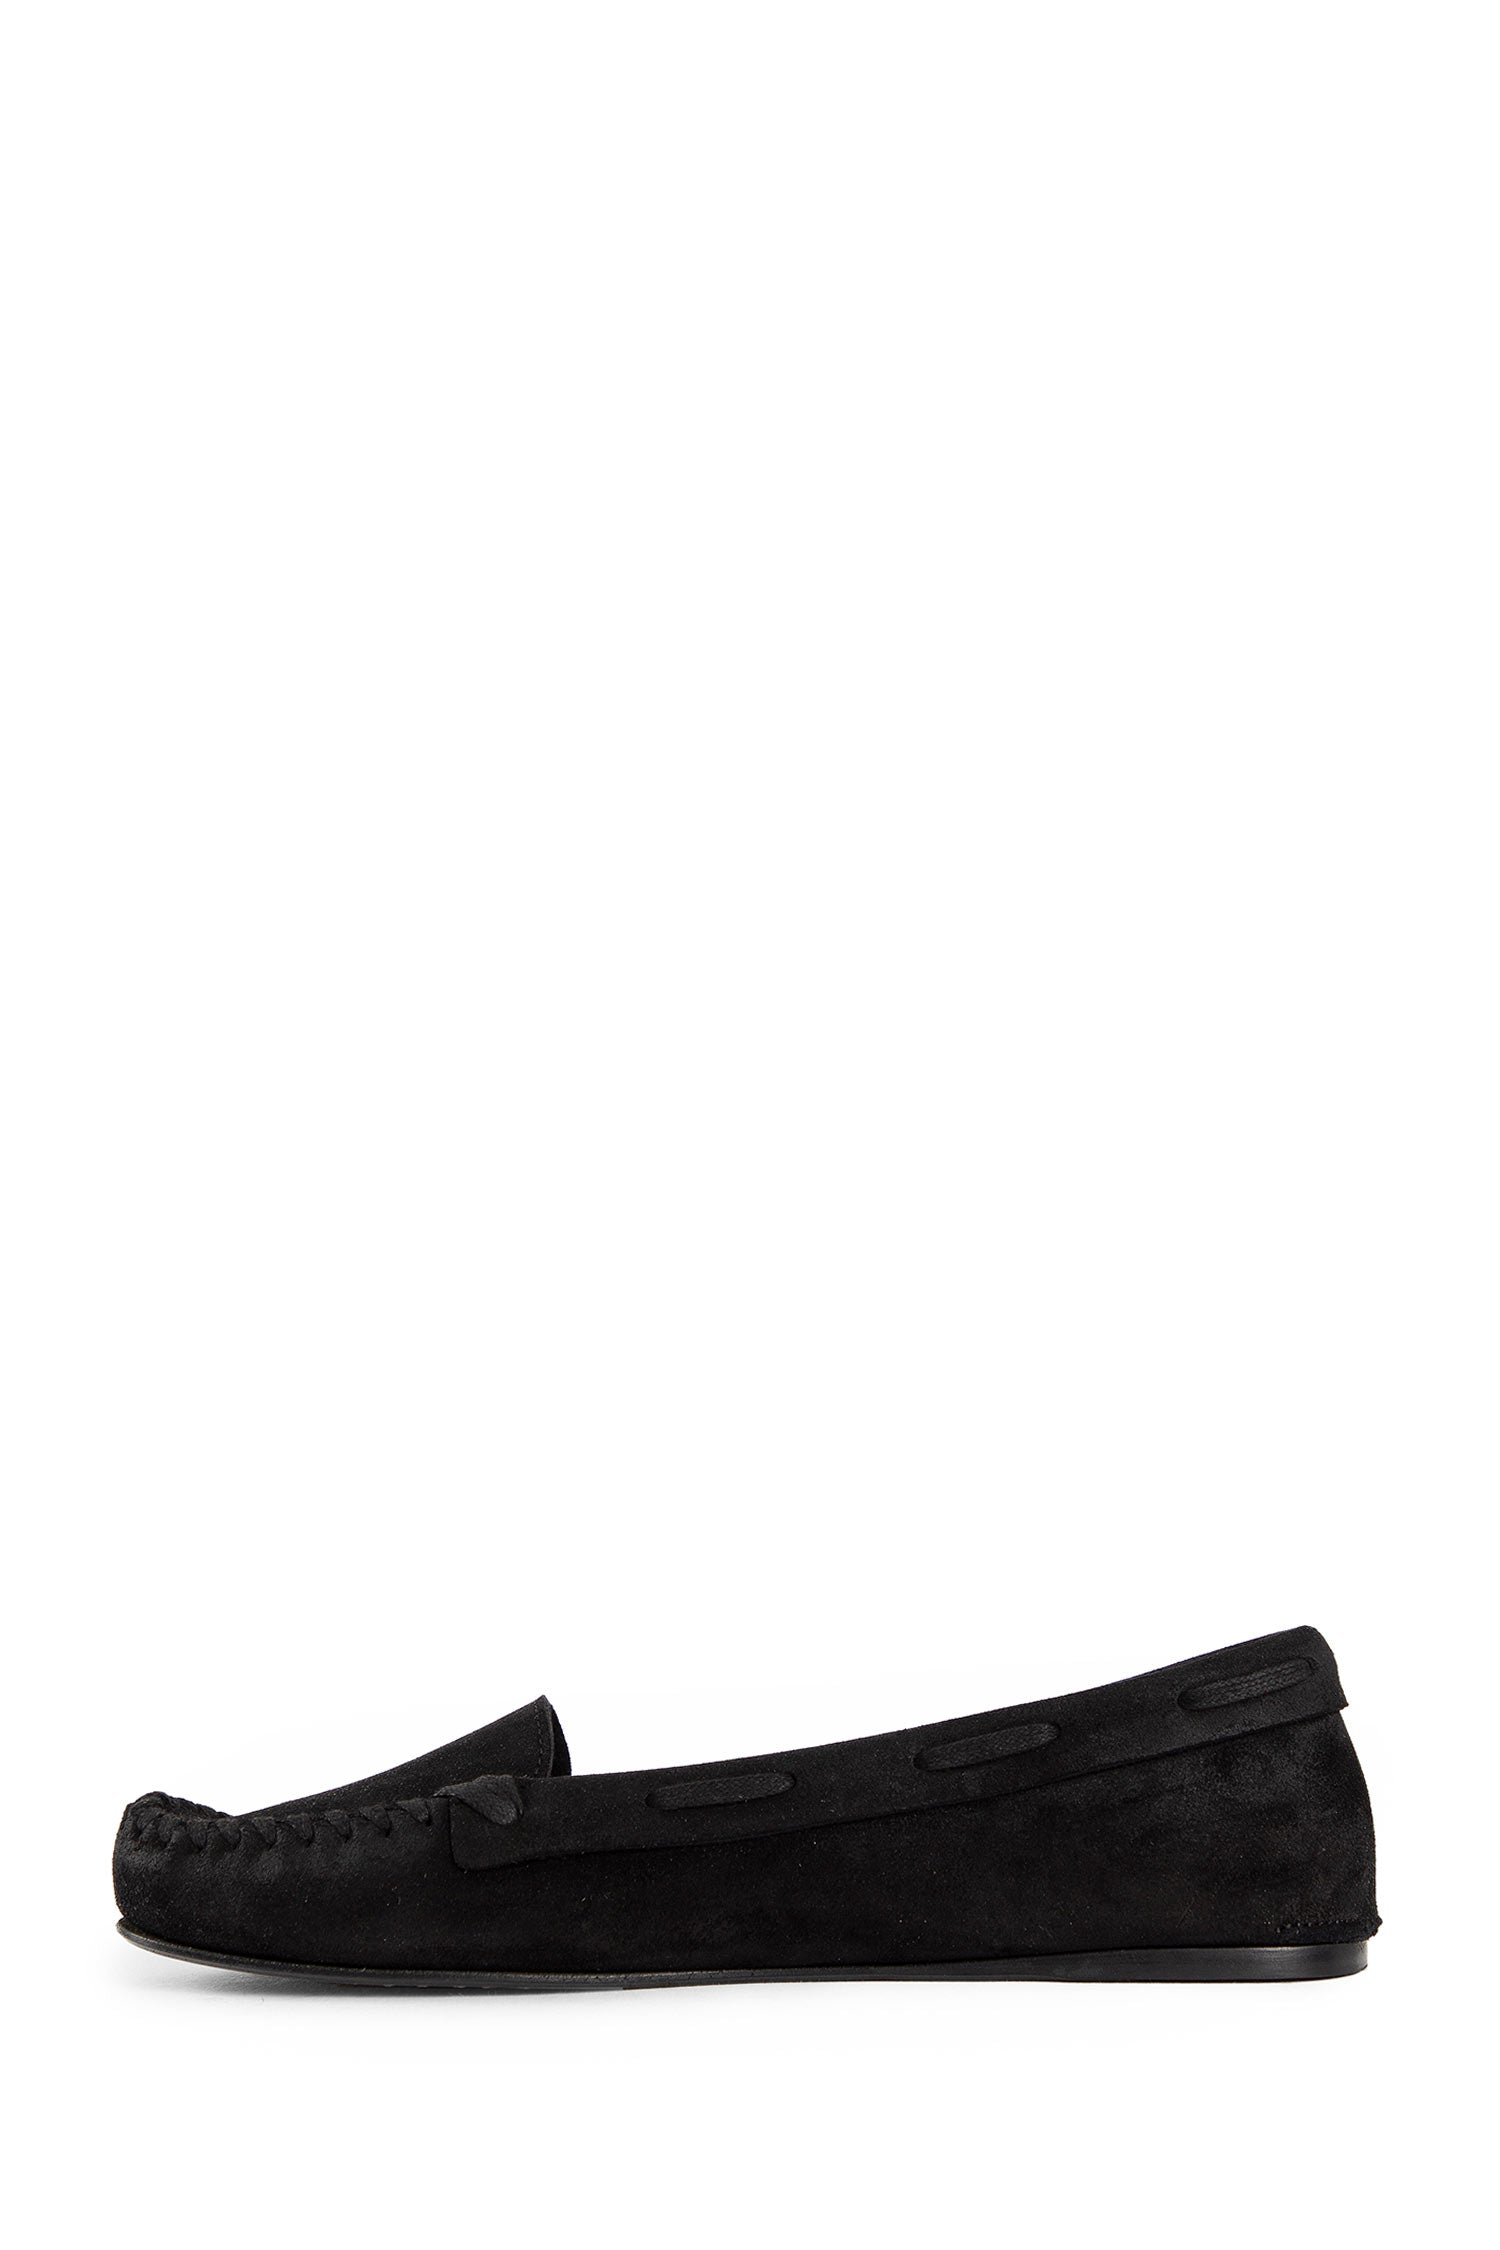 THE ROW WOMAN BLACK LOAFERS & FLATS